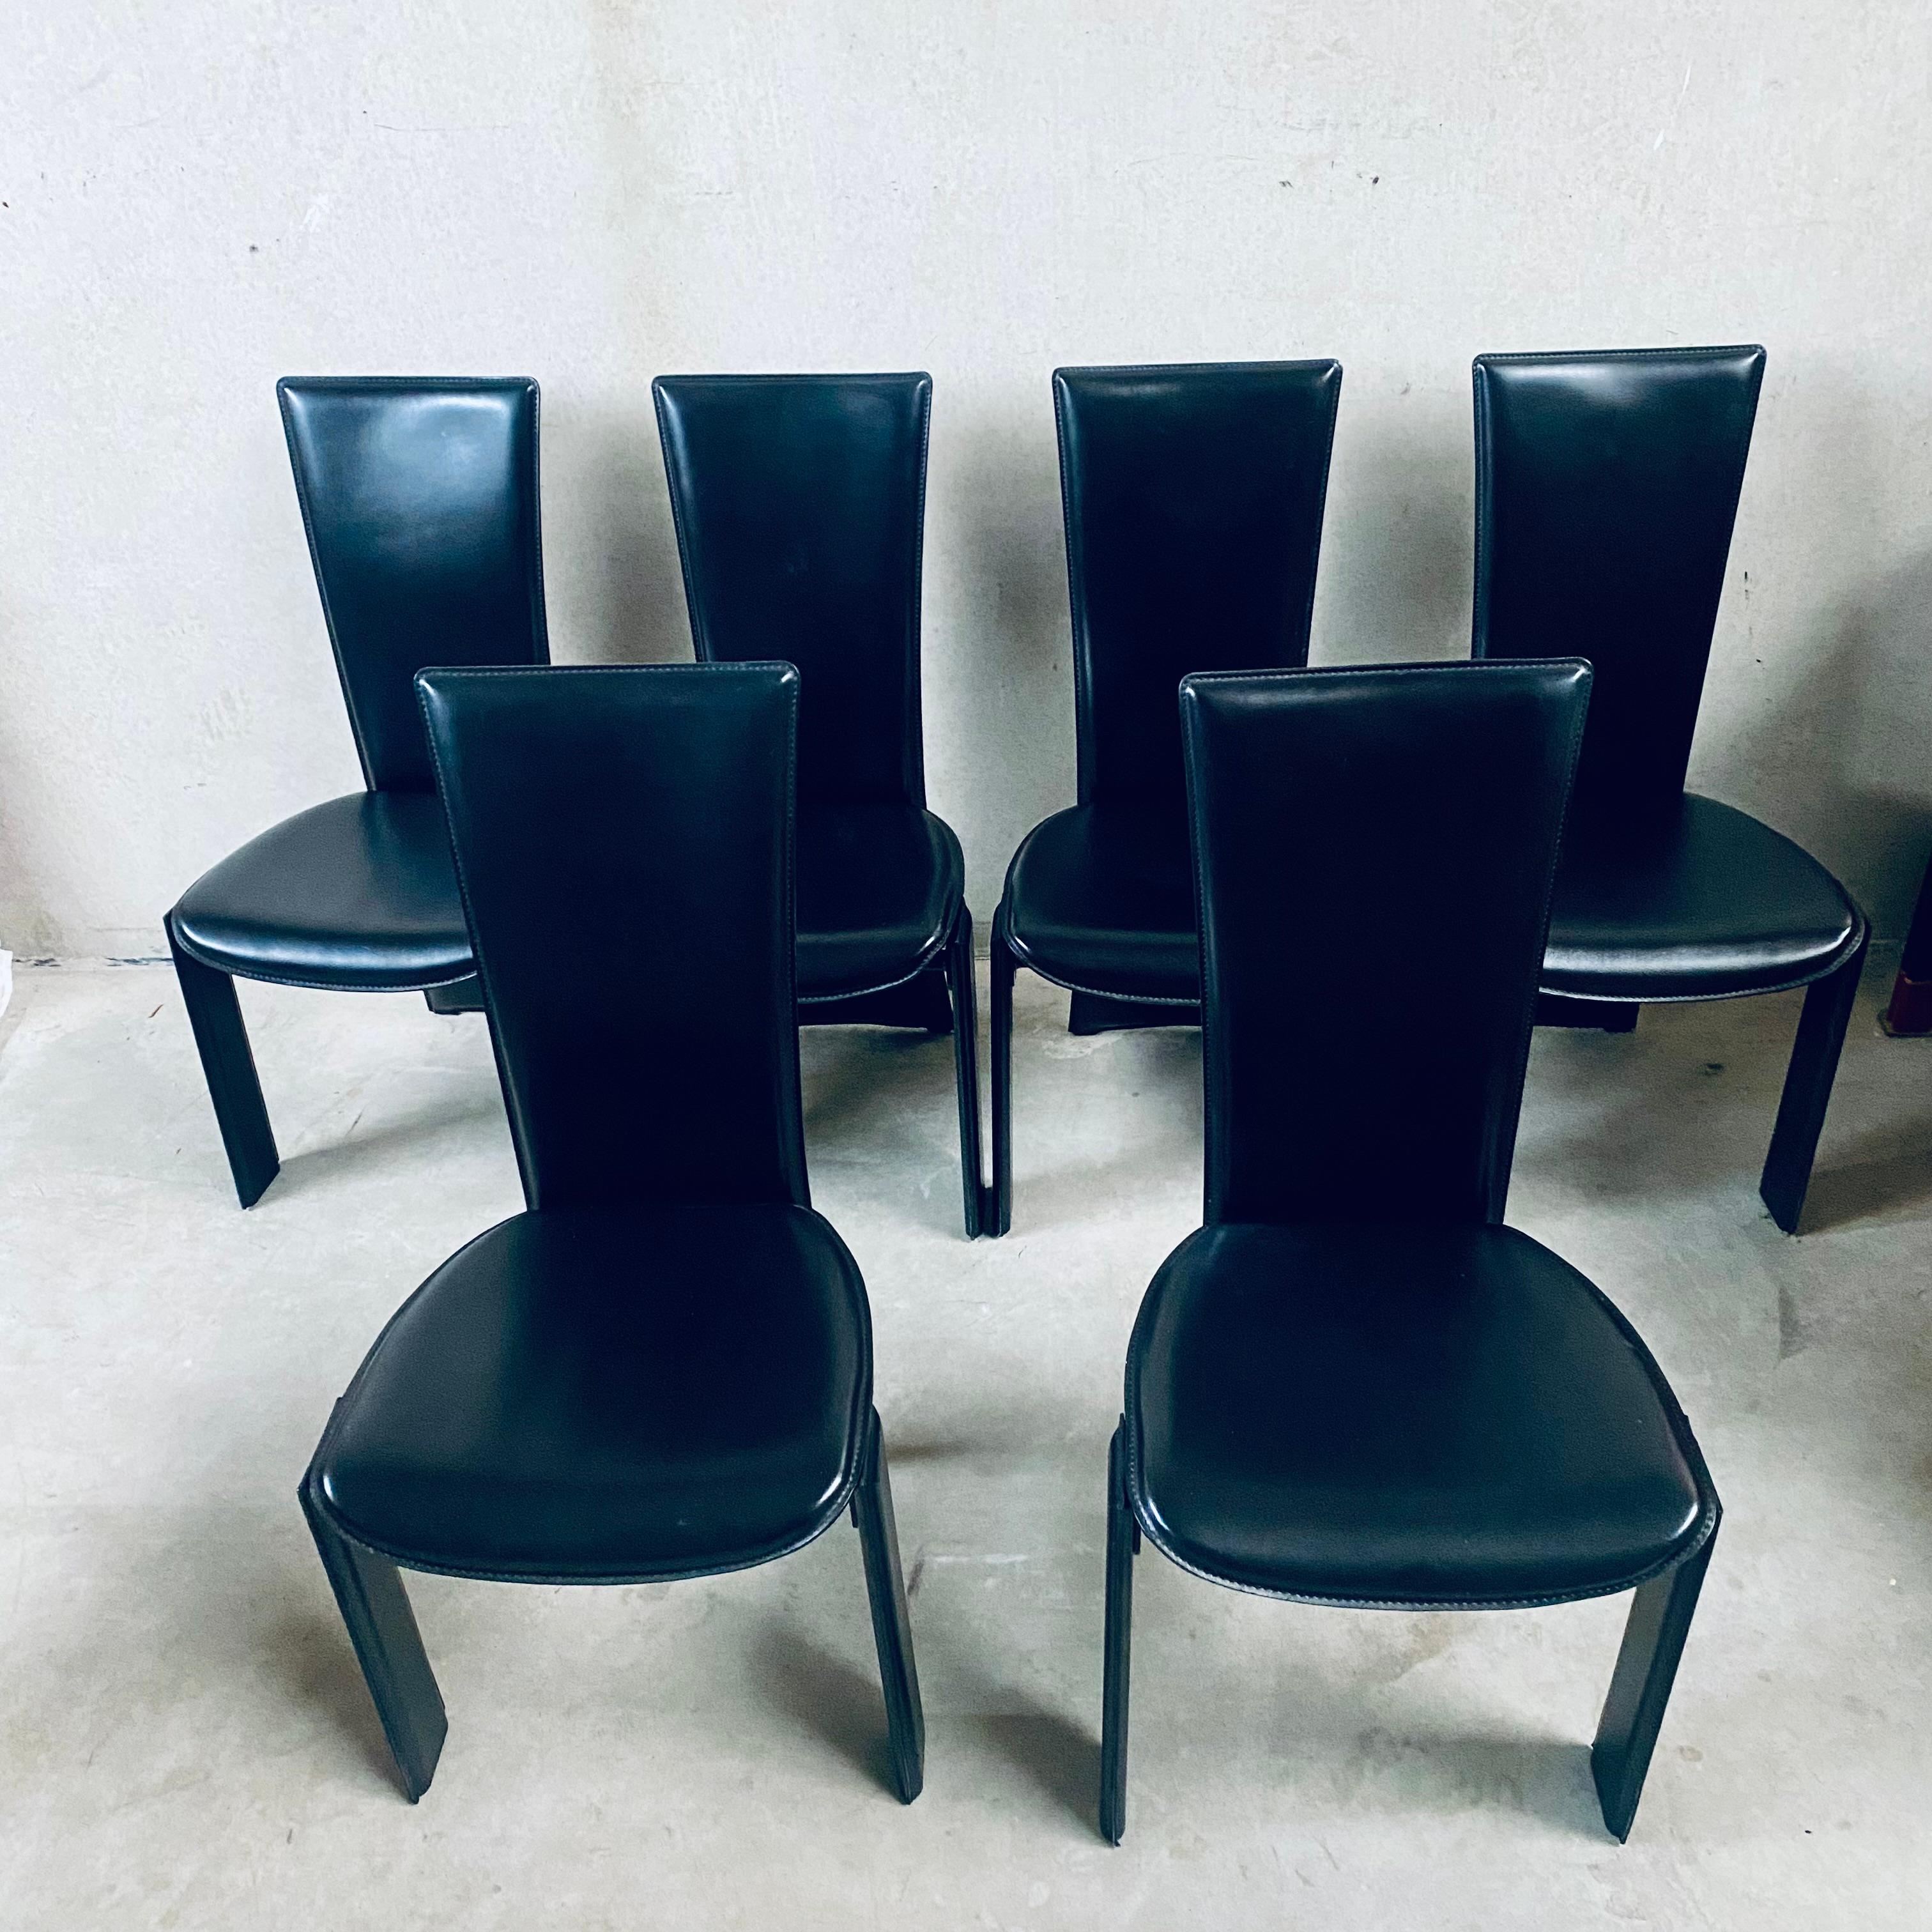 6 x Black Leather Tripot Dining Chairs by Pietro Costantini, Italy 1980 For Sale 4